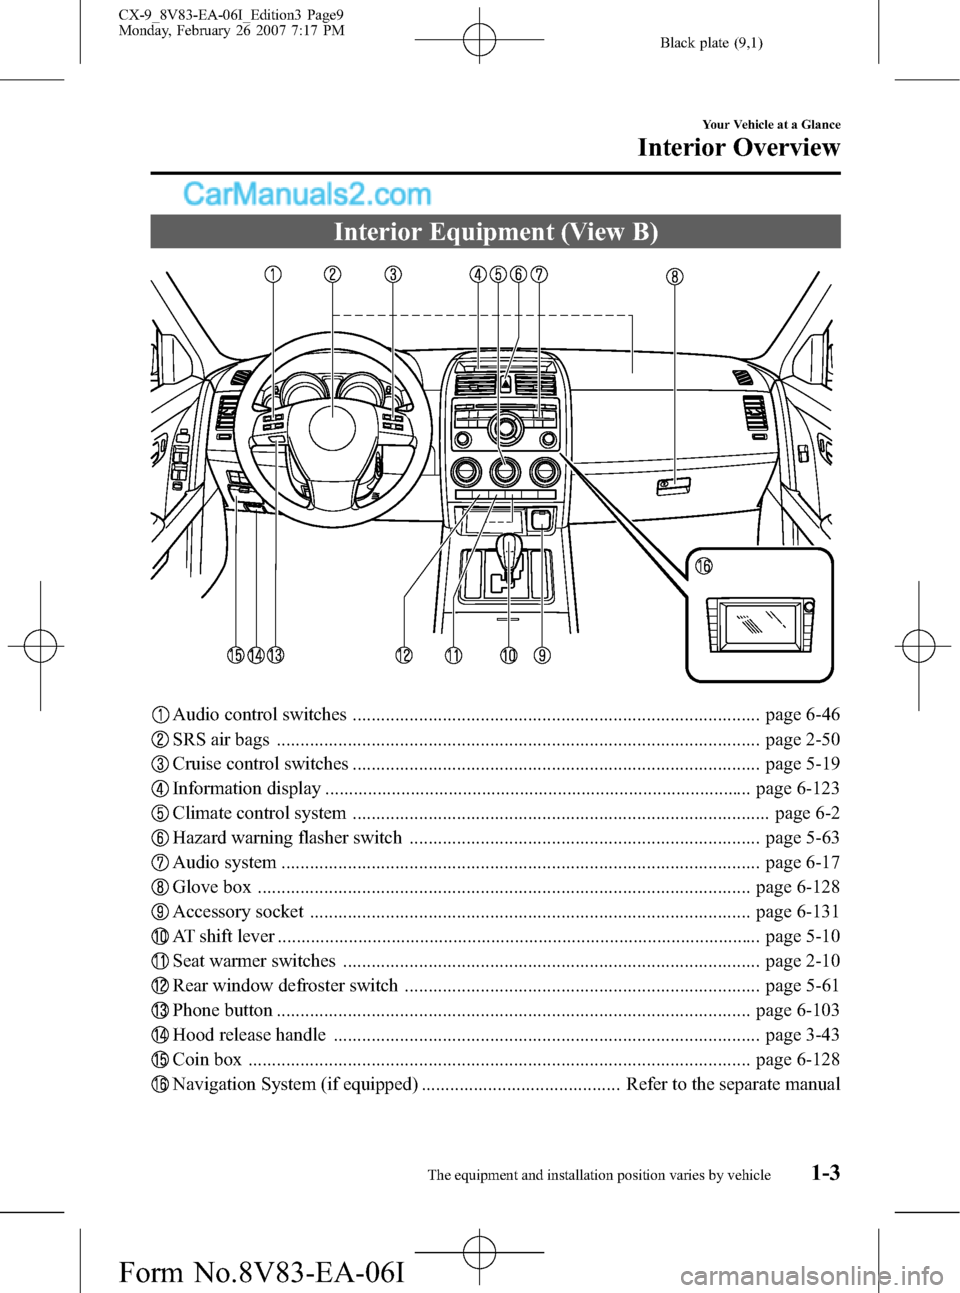 MAZDA MODEL CX-9 2007  Owners Manual (in English) Black plate (9,1)
Interior Equipment (View B)
Audio control switches ...................................................................................... page 6-46
SRS air bags .....................